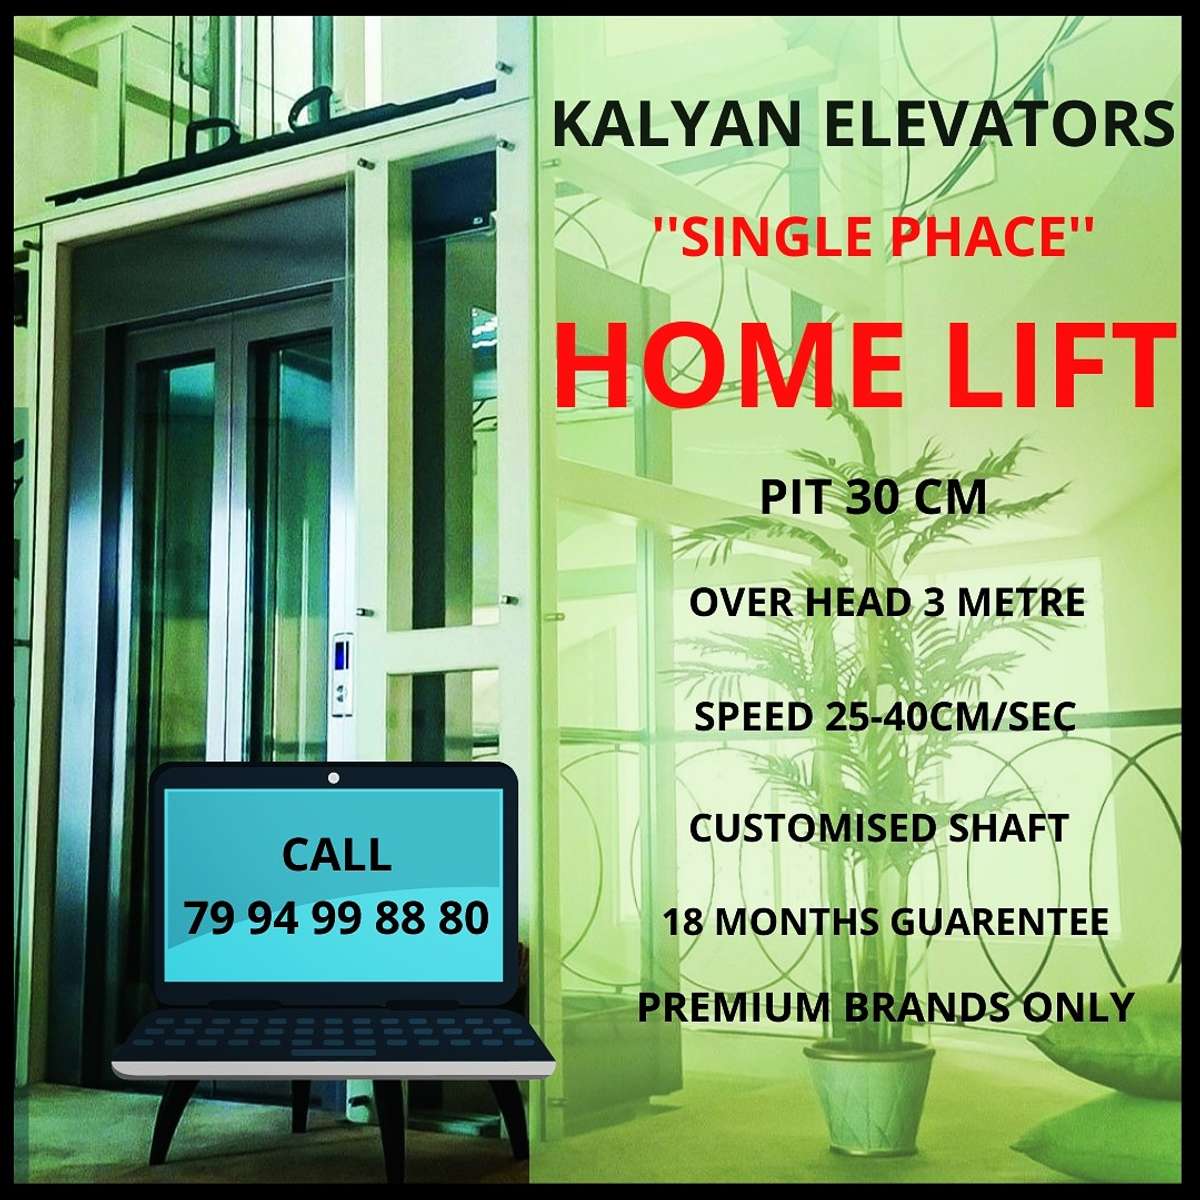 related new home lifts contact please